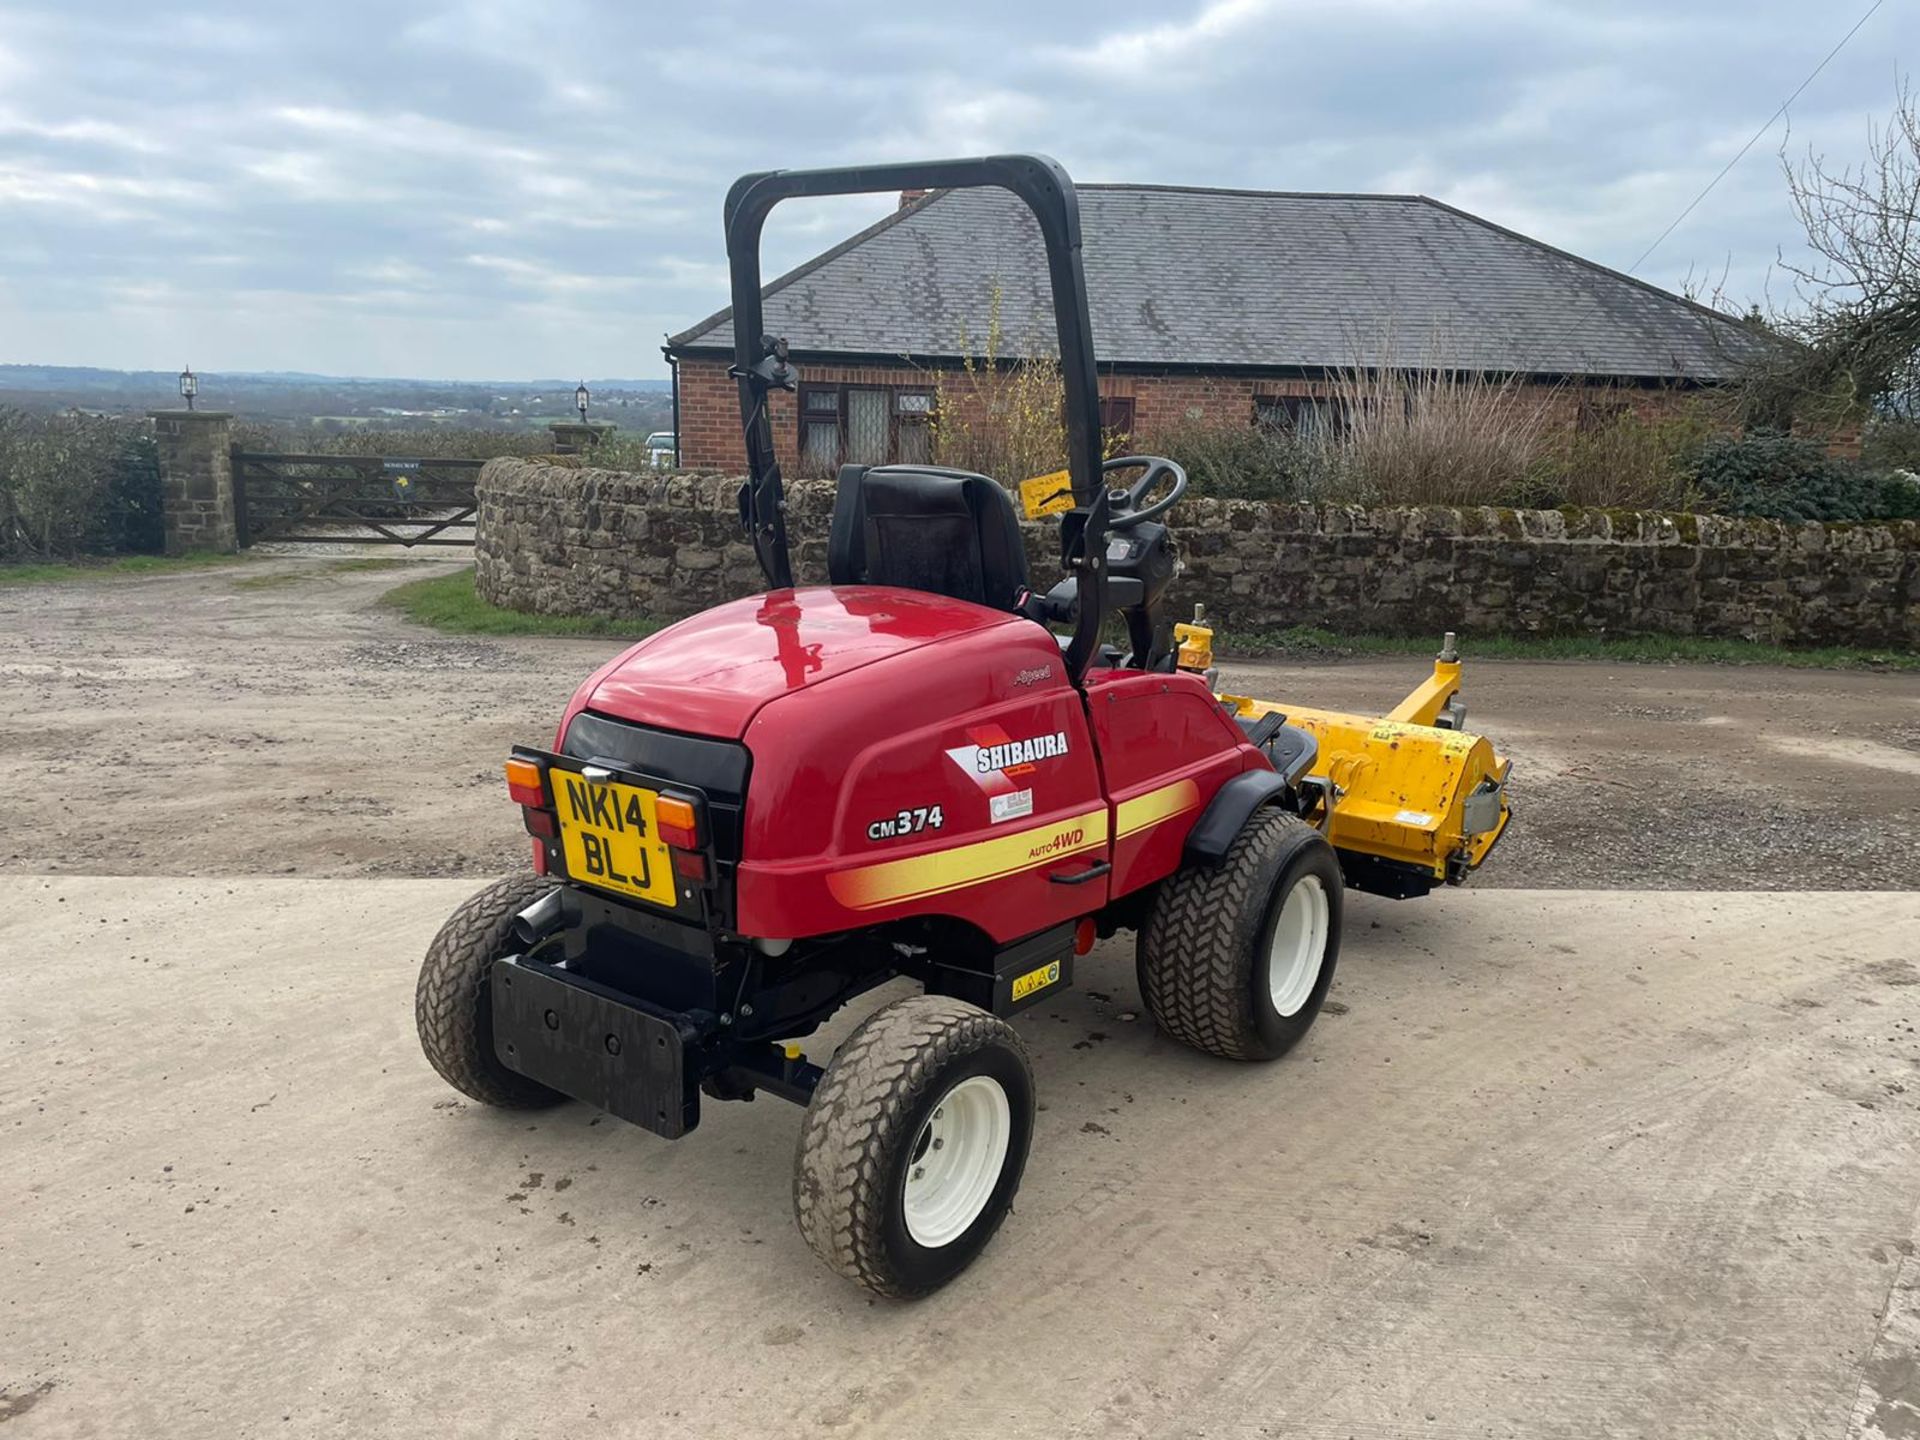 2014 SHIBAURA CM374 OUTFRONT MOWER, RUNS, DRIVES, CUTS, IN GOOD CONDITION, LOW 1450 HOURS *PLUS VAT* - Image 7 of 10